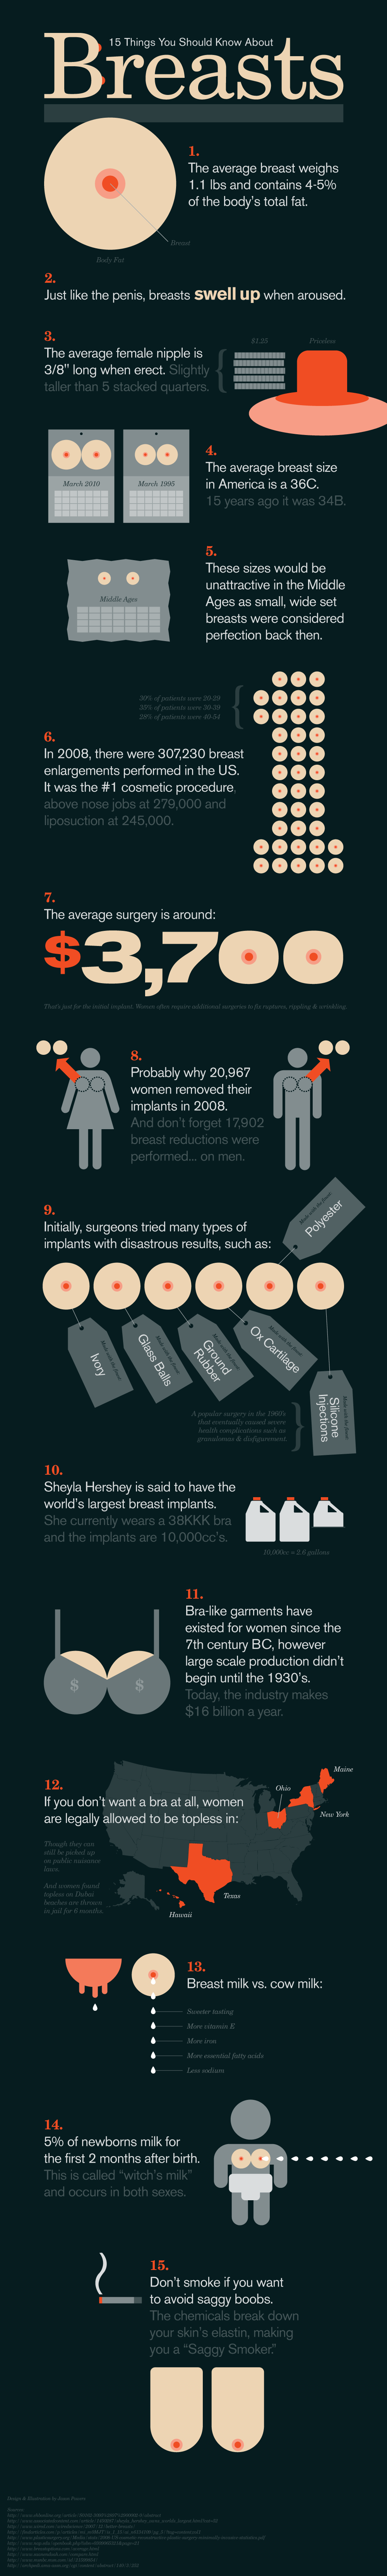 15 Things to Know About Breasts Infographic